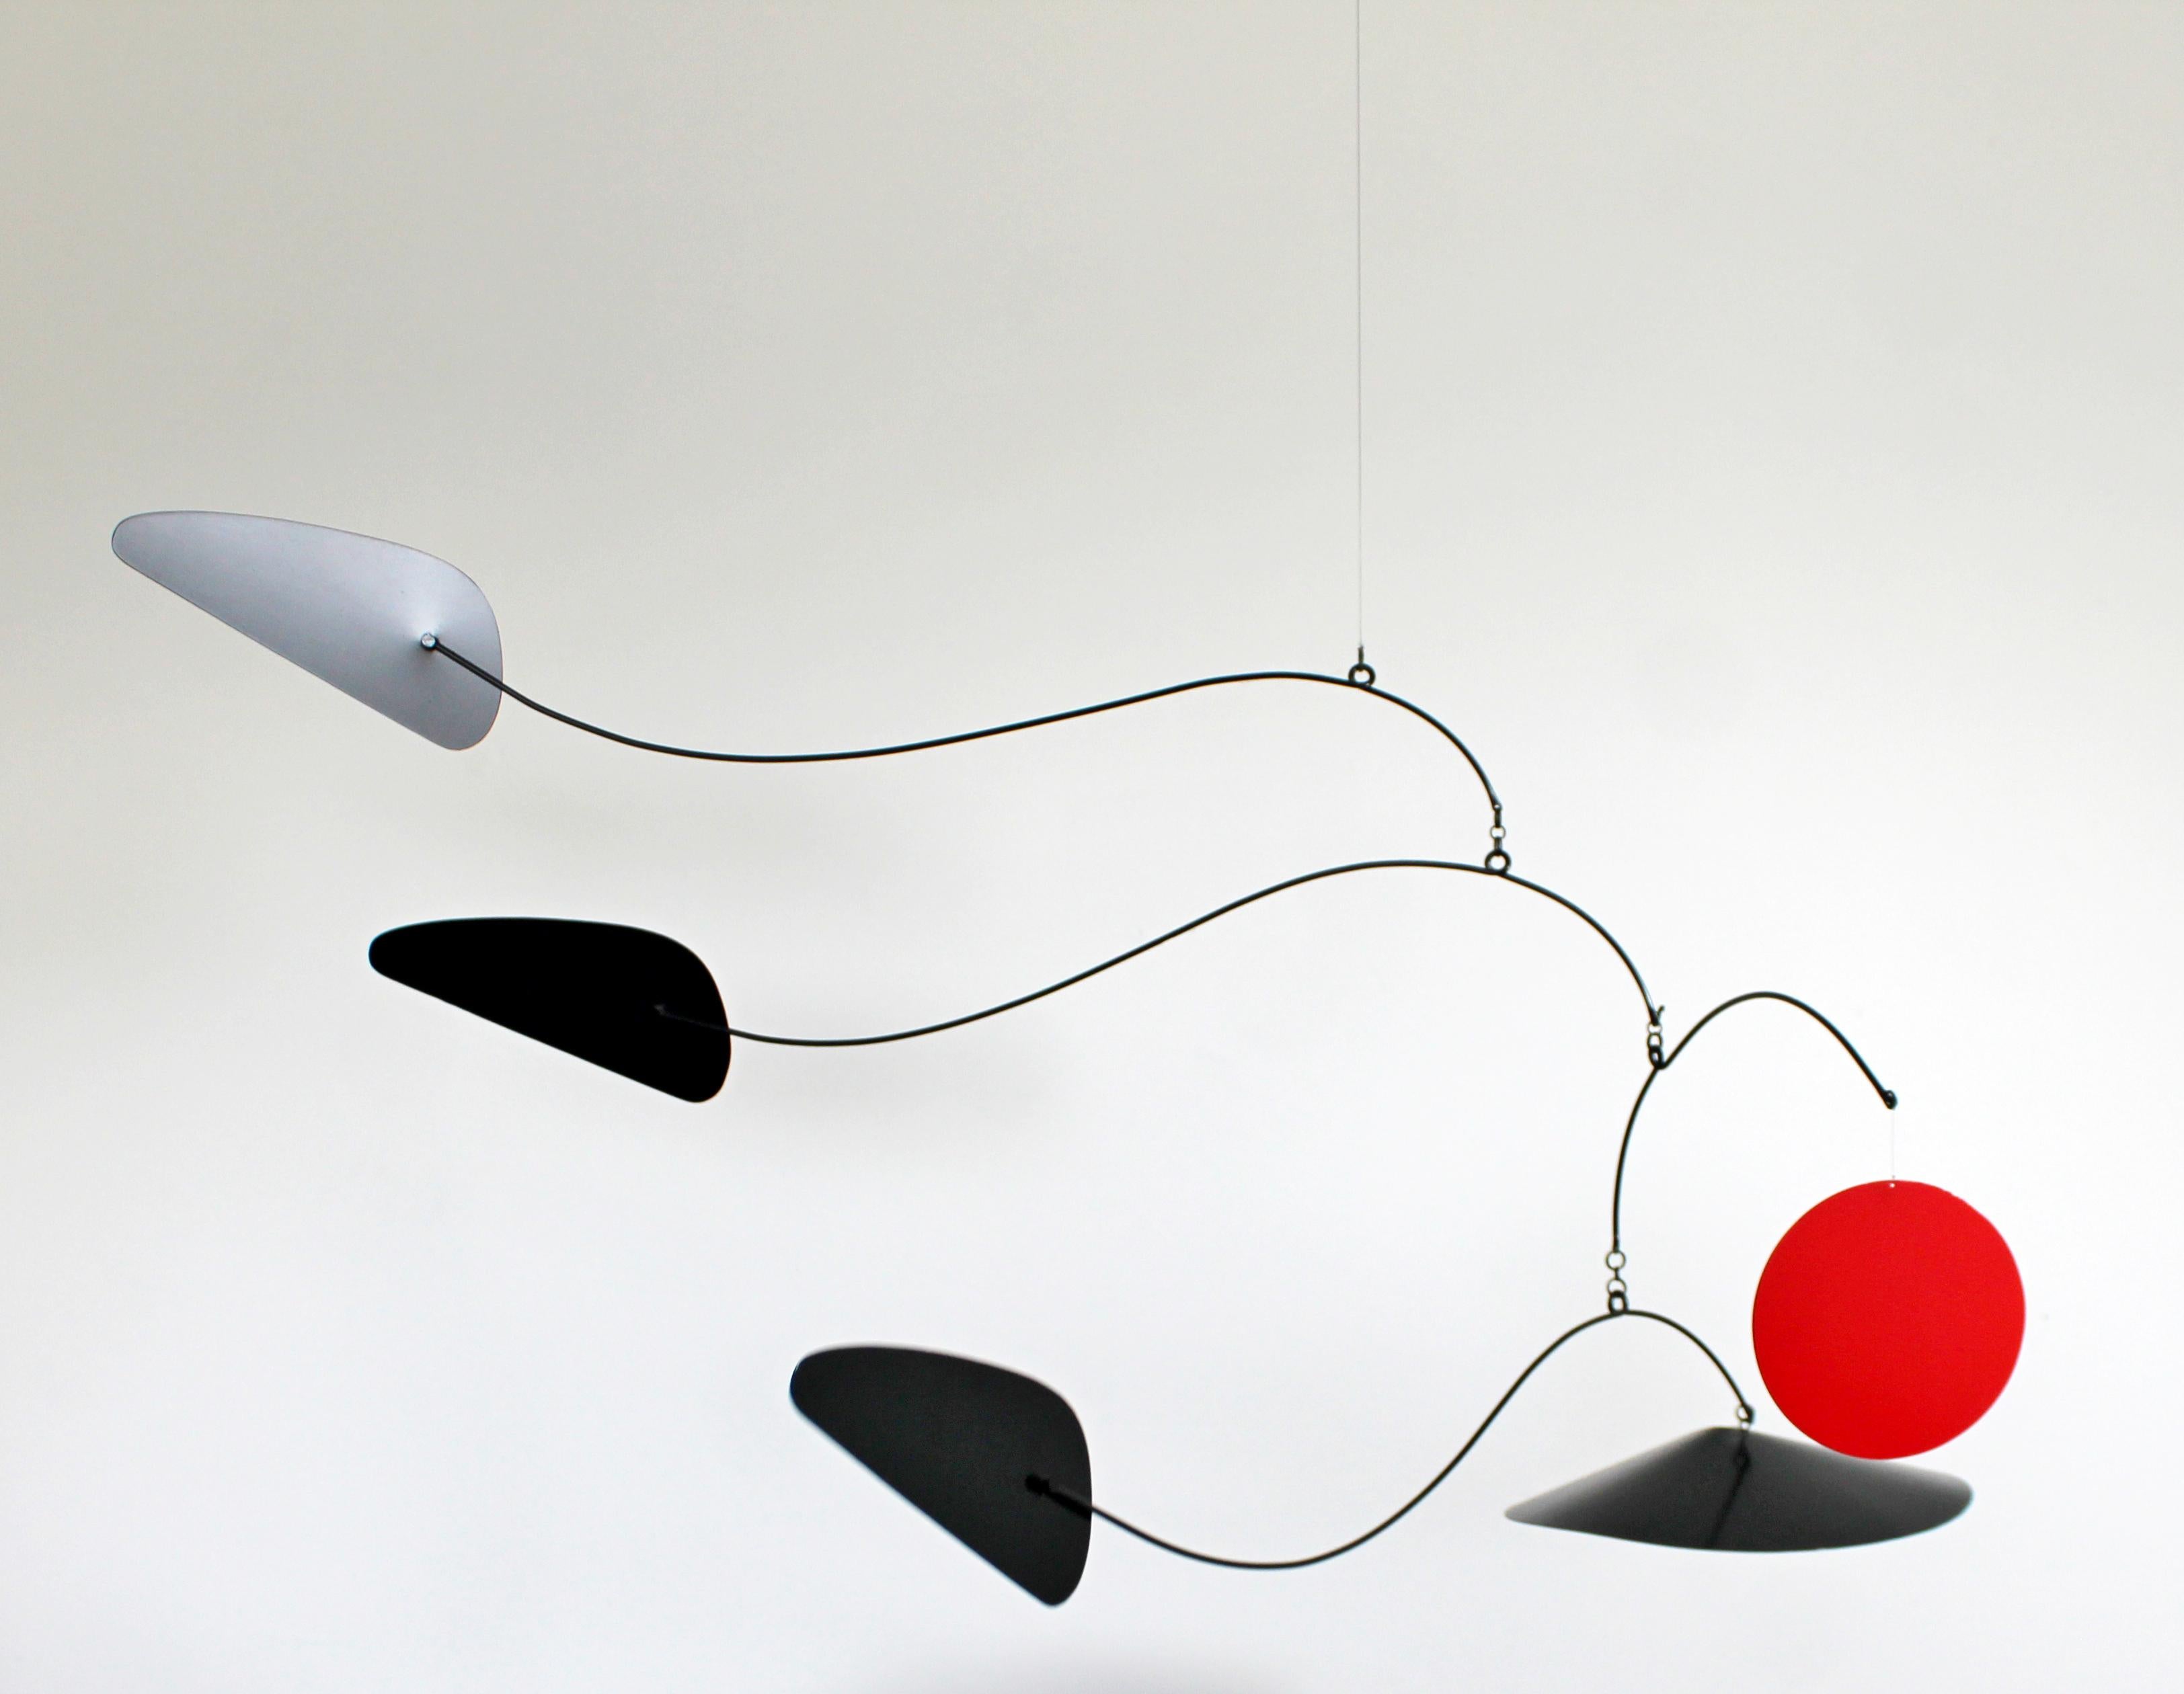 For your consideration is a marvelous, hanging mobile sculpture, in the style of Joan Miró or, signed by the artist and dated 1994. In excellent condition. The dimensions are 52